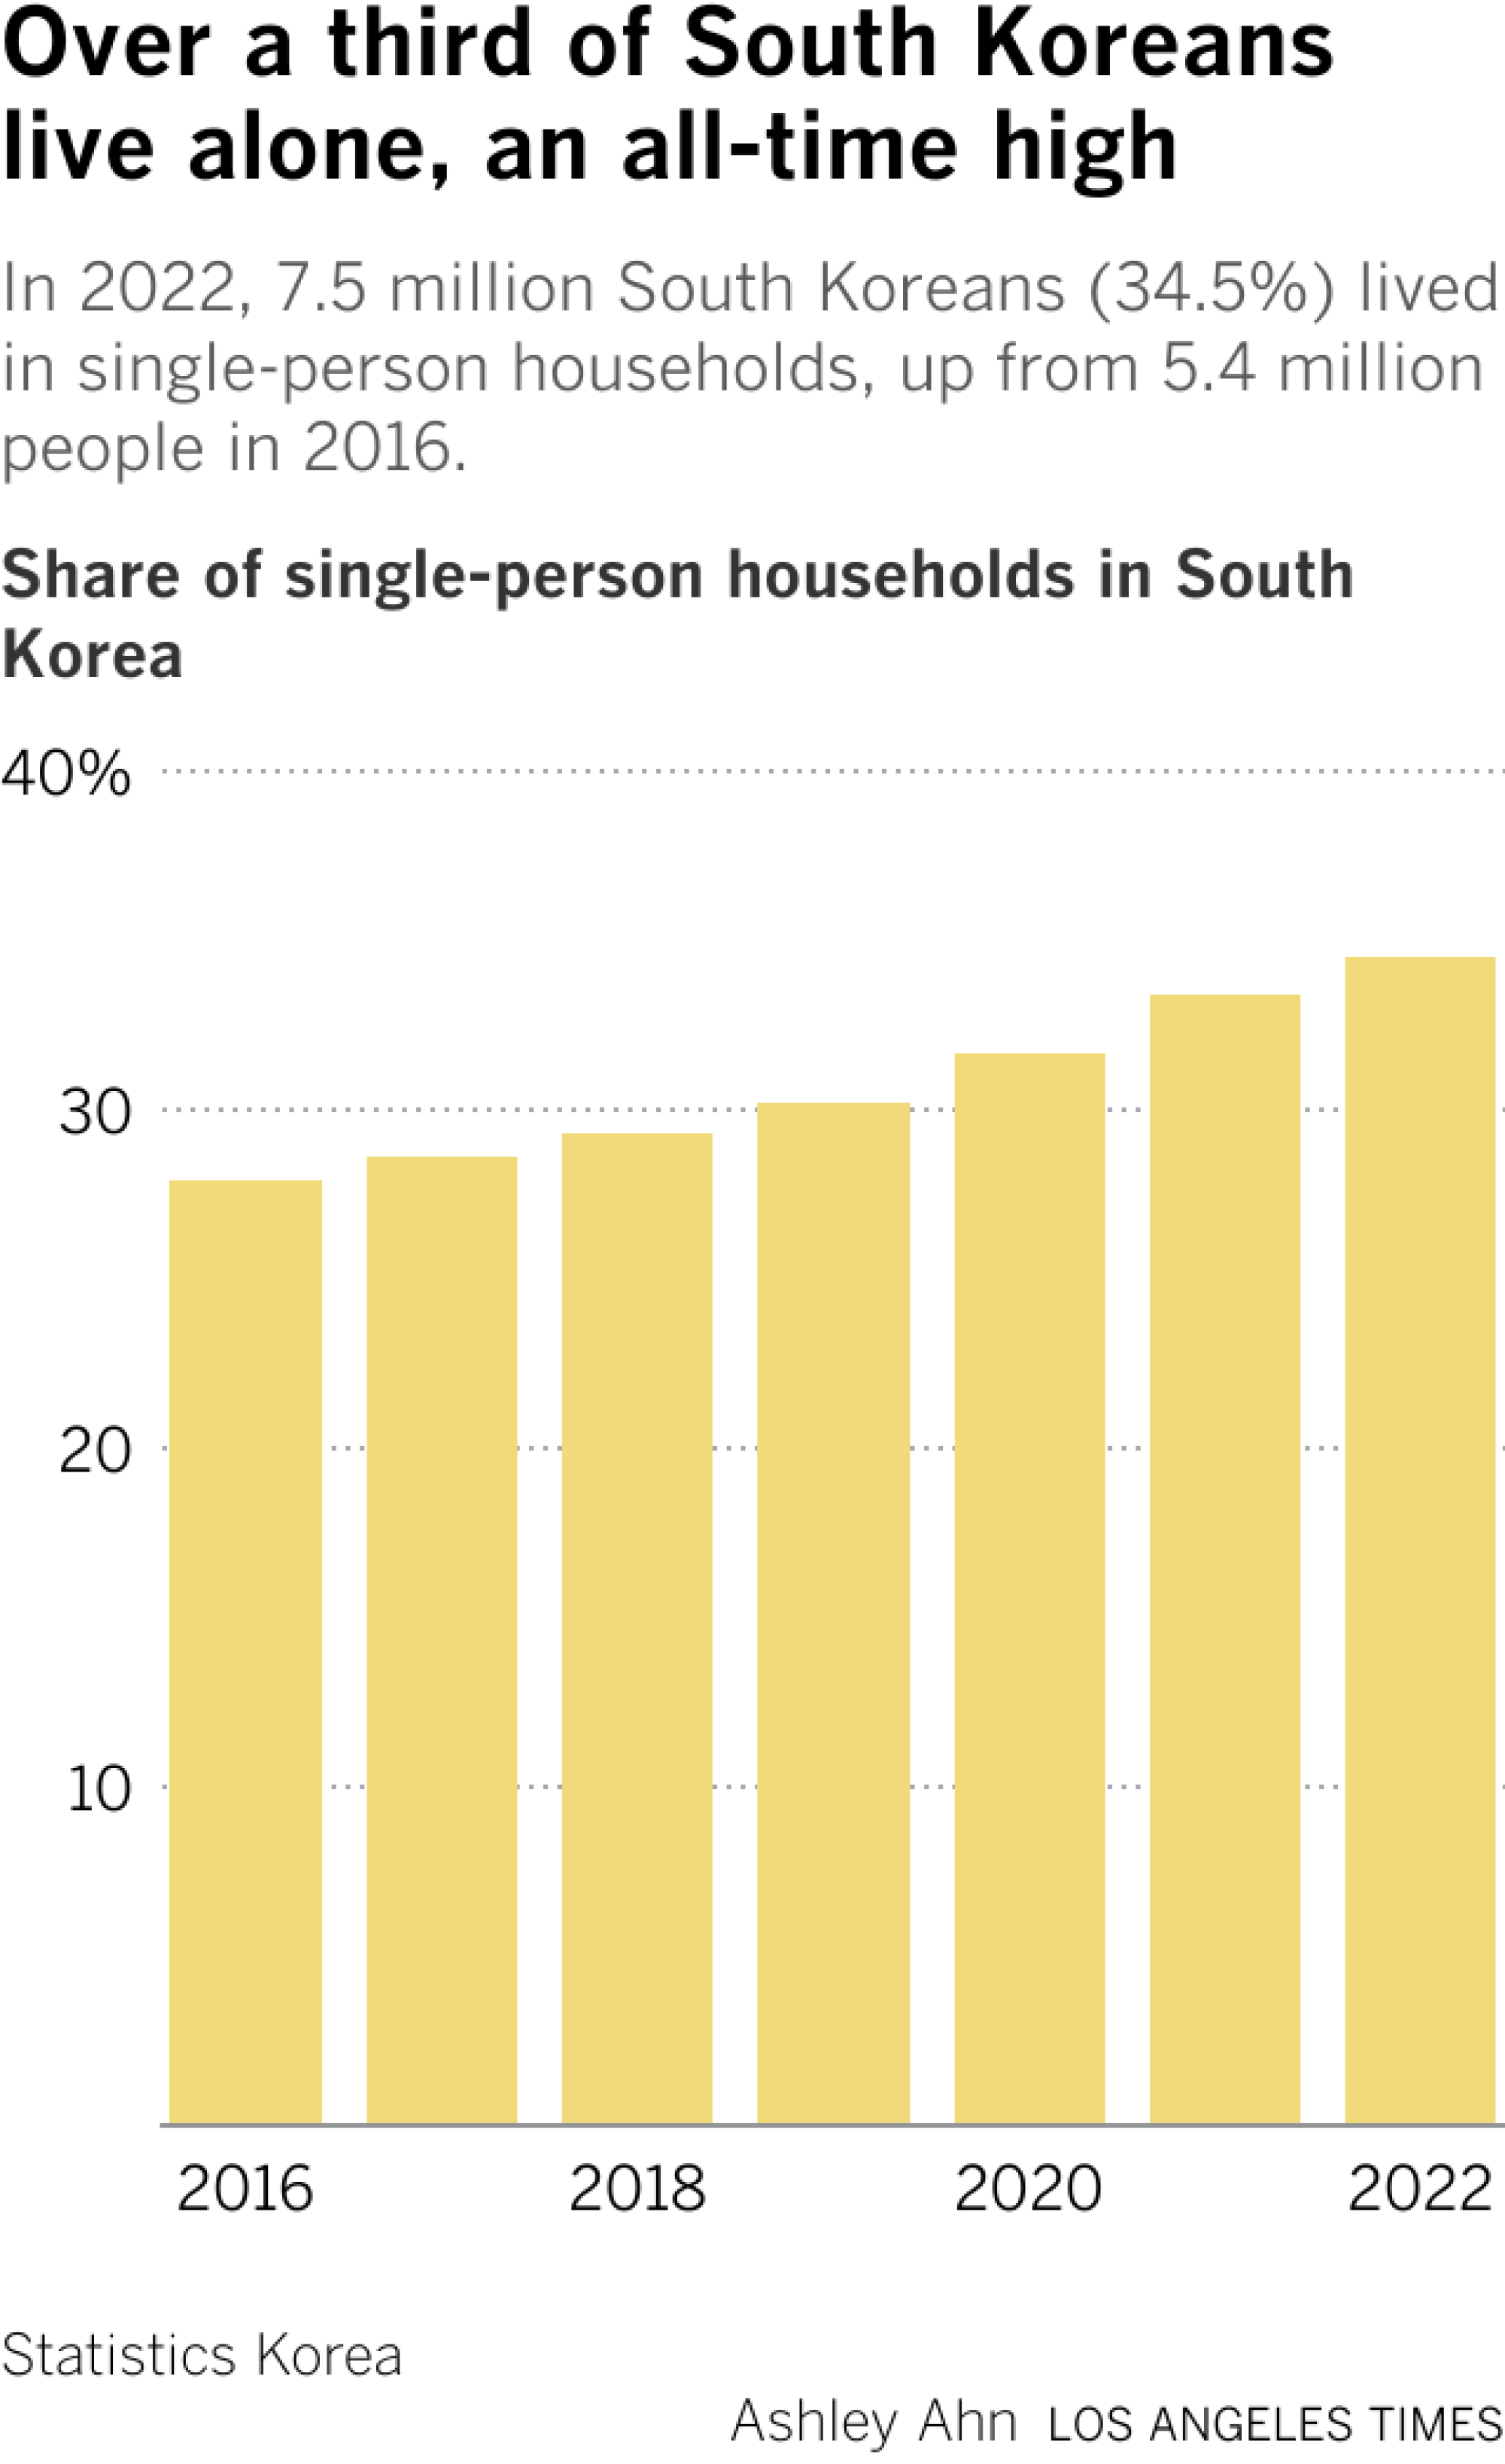 The share of single-person households in South Korea rose from 27.9% in 2016, 30.2% in 2019, to 34.5% in 2022.